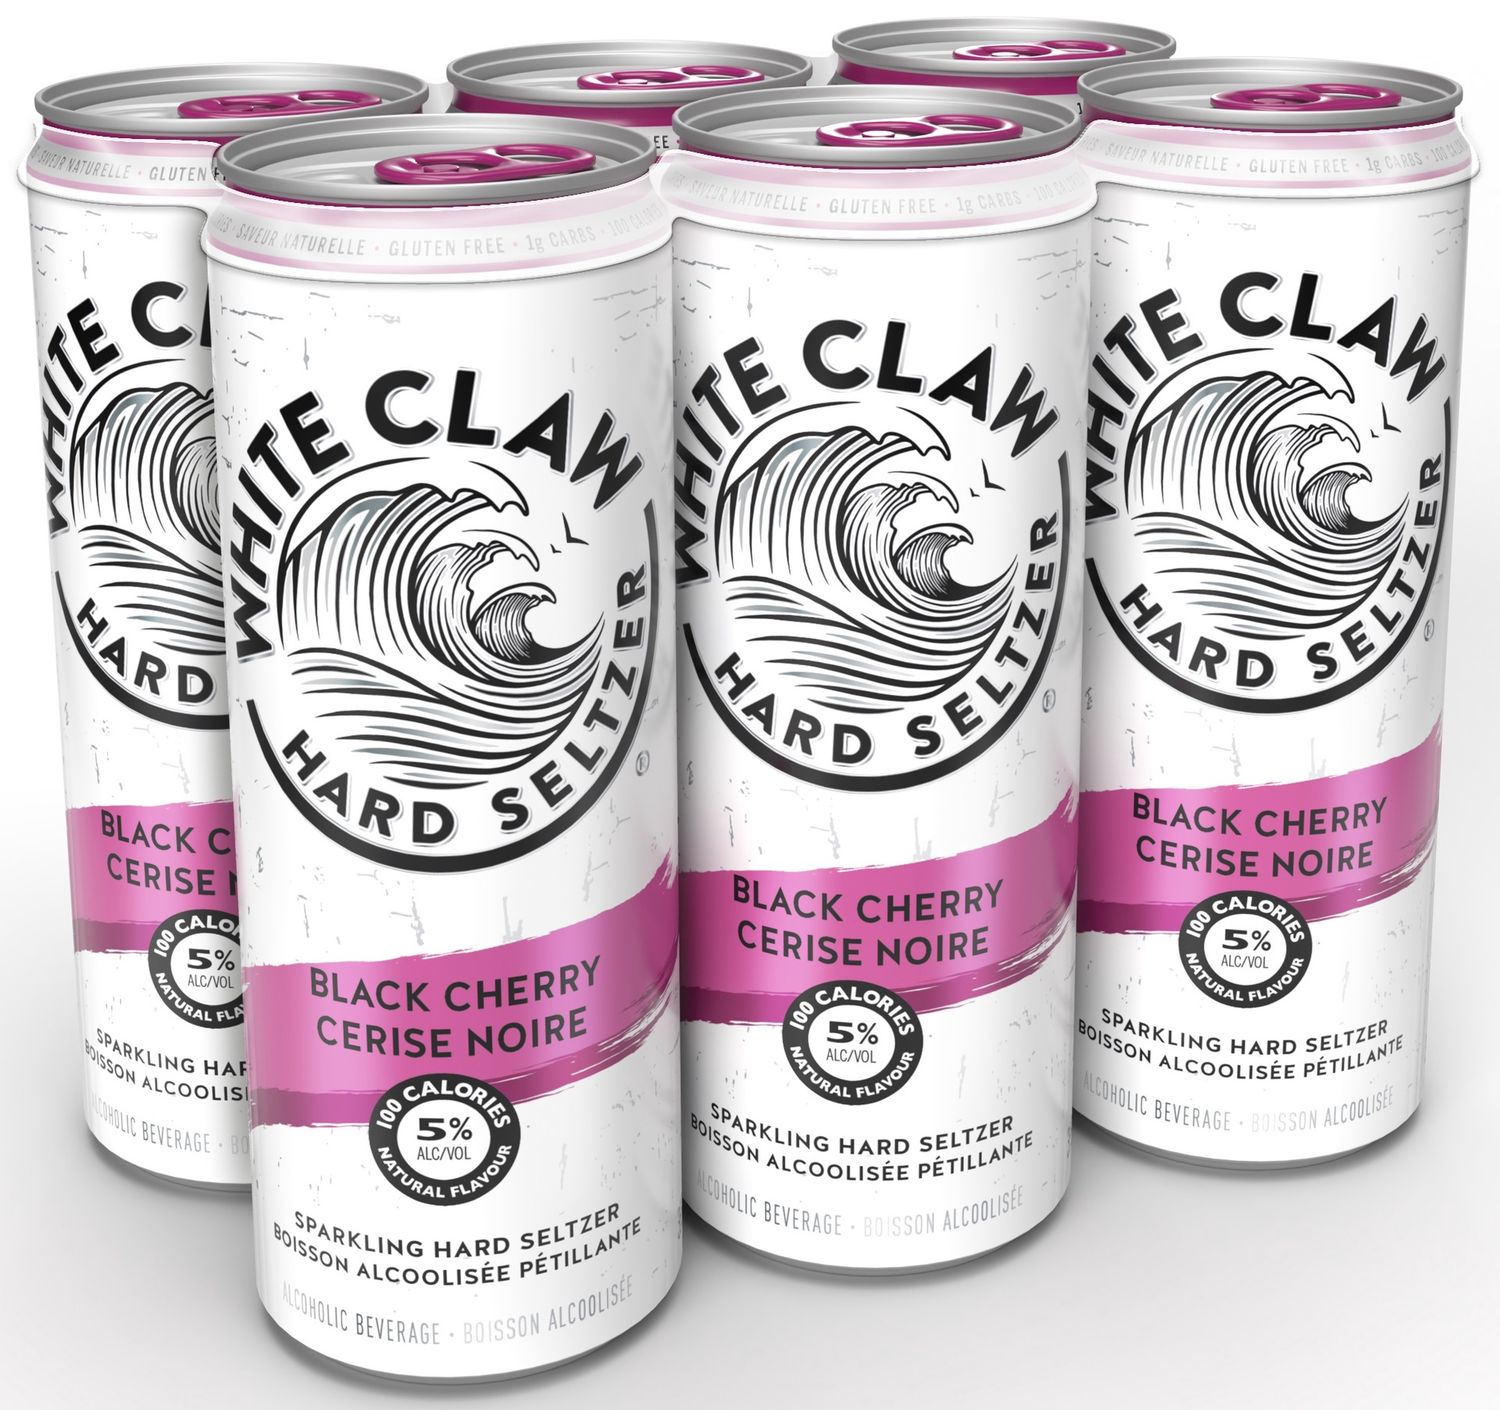 WHITE CLAW BLACK CHERRY, Size: 6 Cans